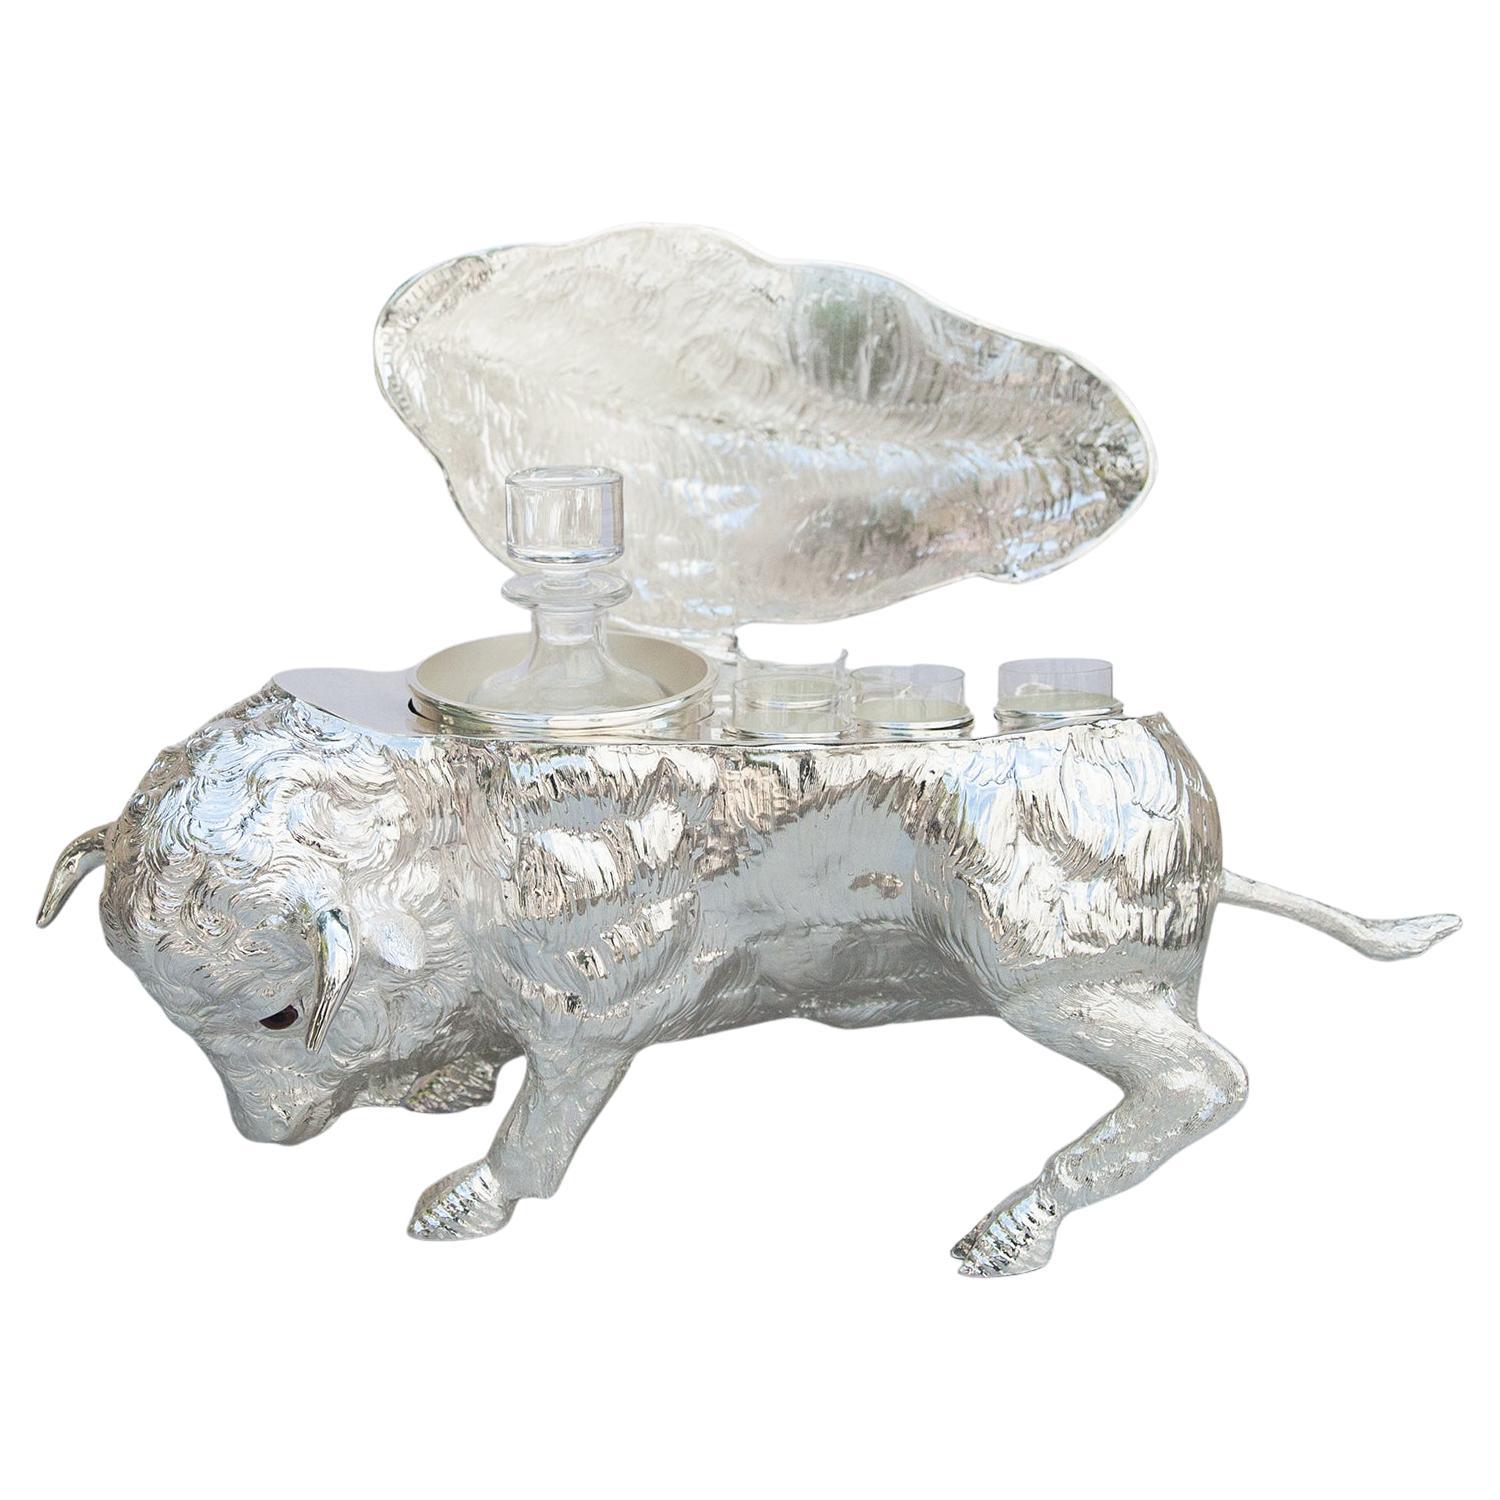 Franco Lapini Wild Bull Bison Silver Plated Liquor Bar Set, Italy, 1970 For Sale